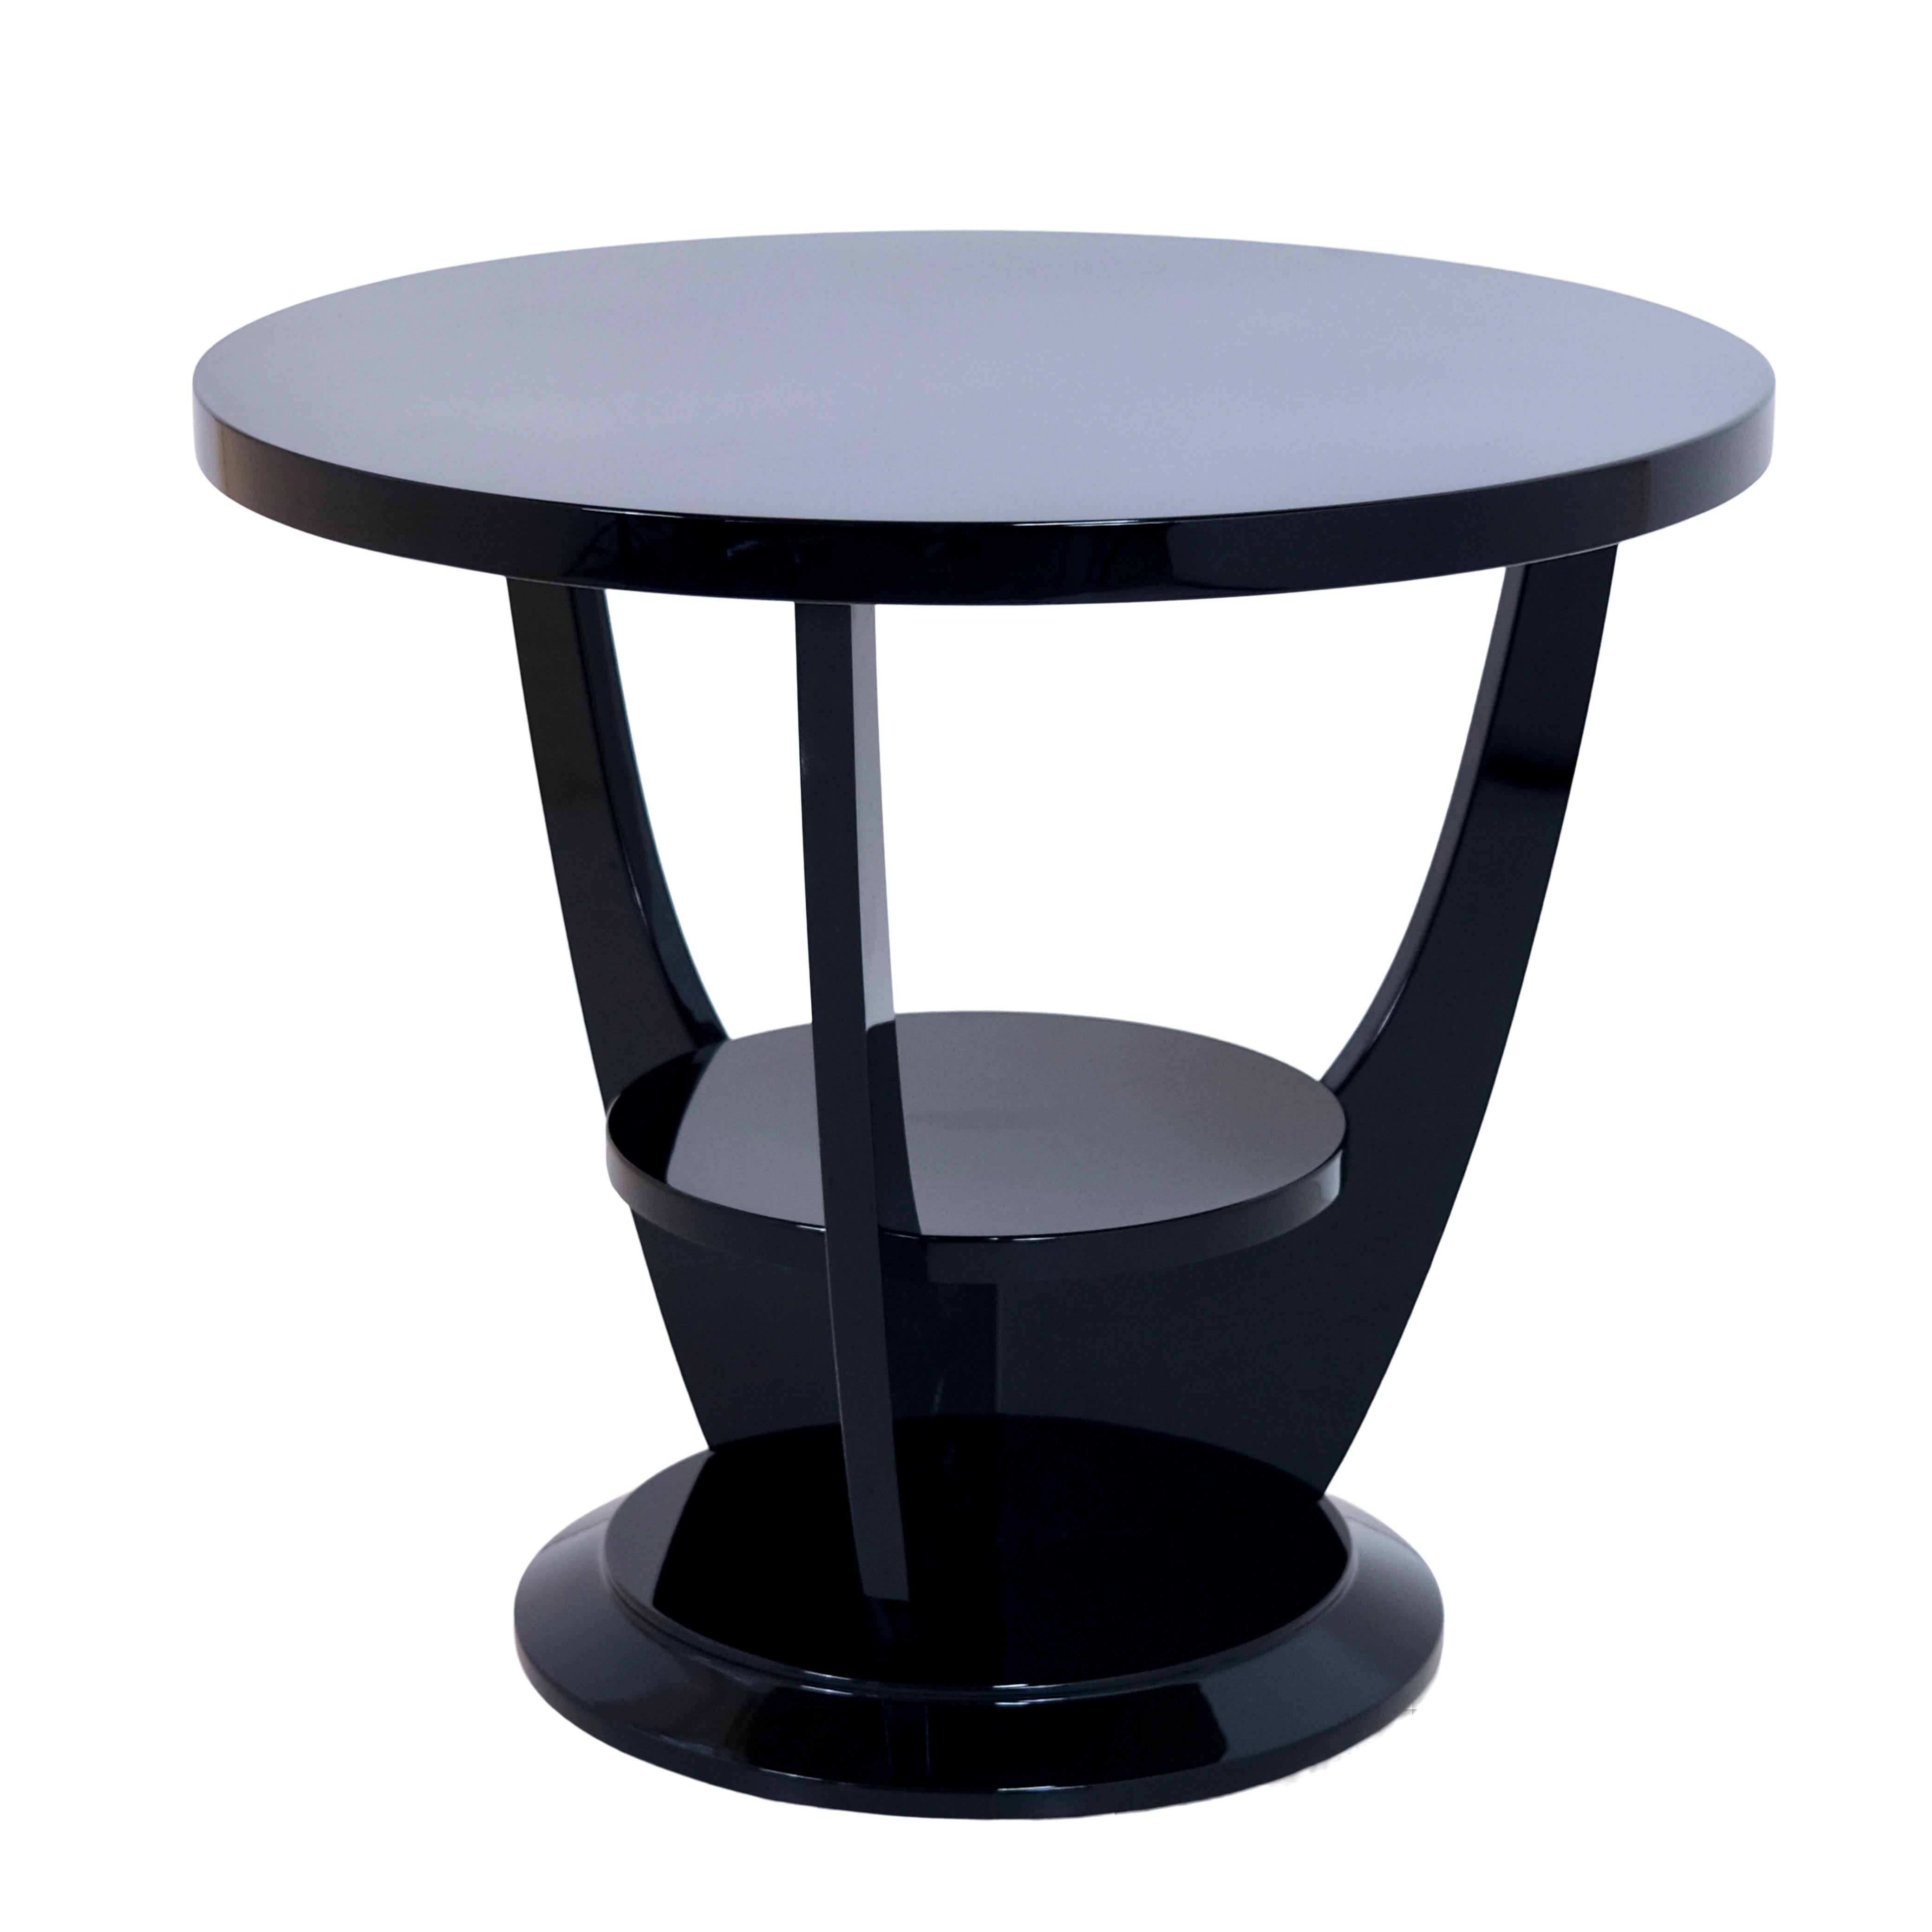 Blackened Round 1930's French Art Deco Side Table in Black Lacquer with Intermediate Shelf